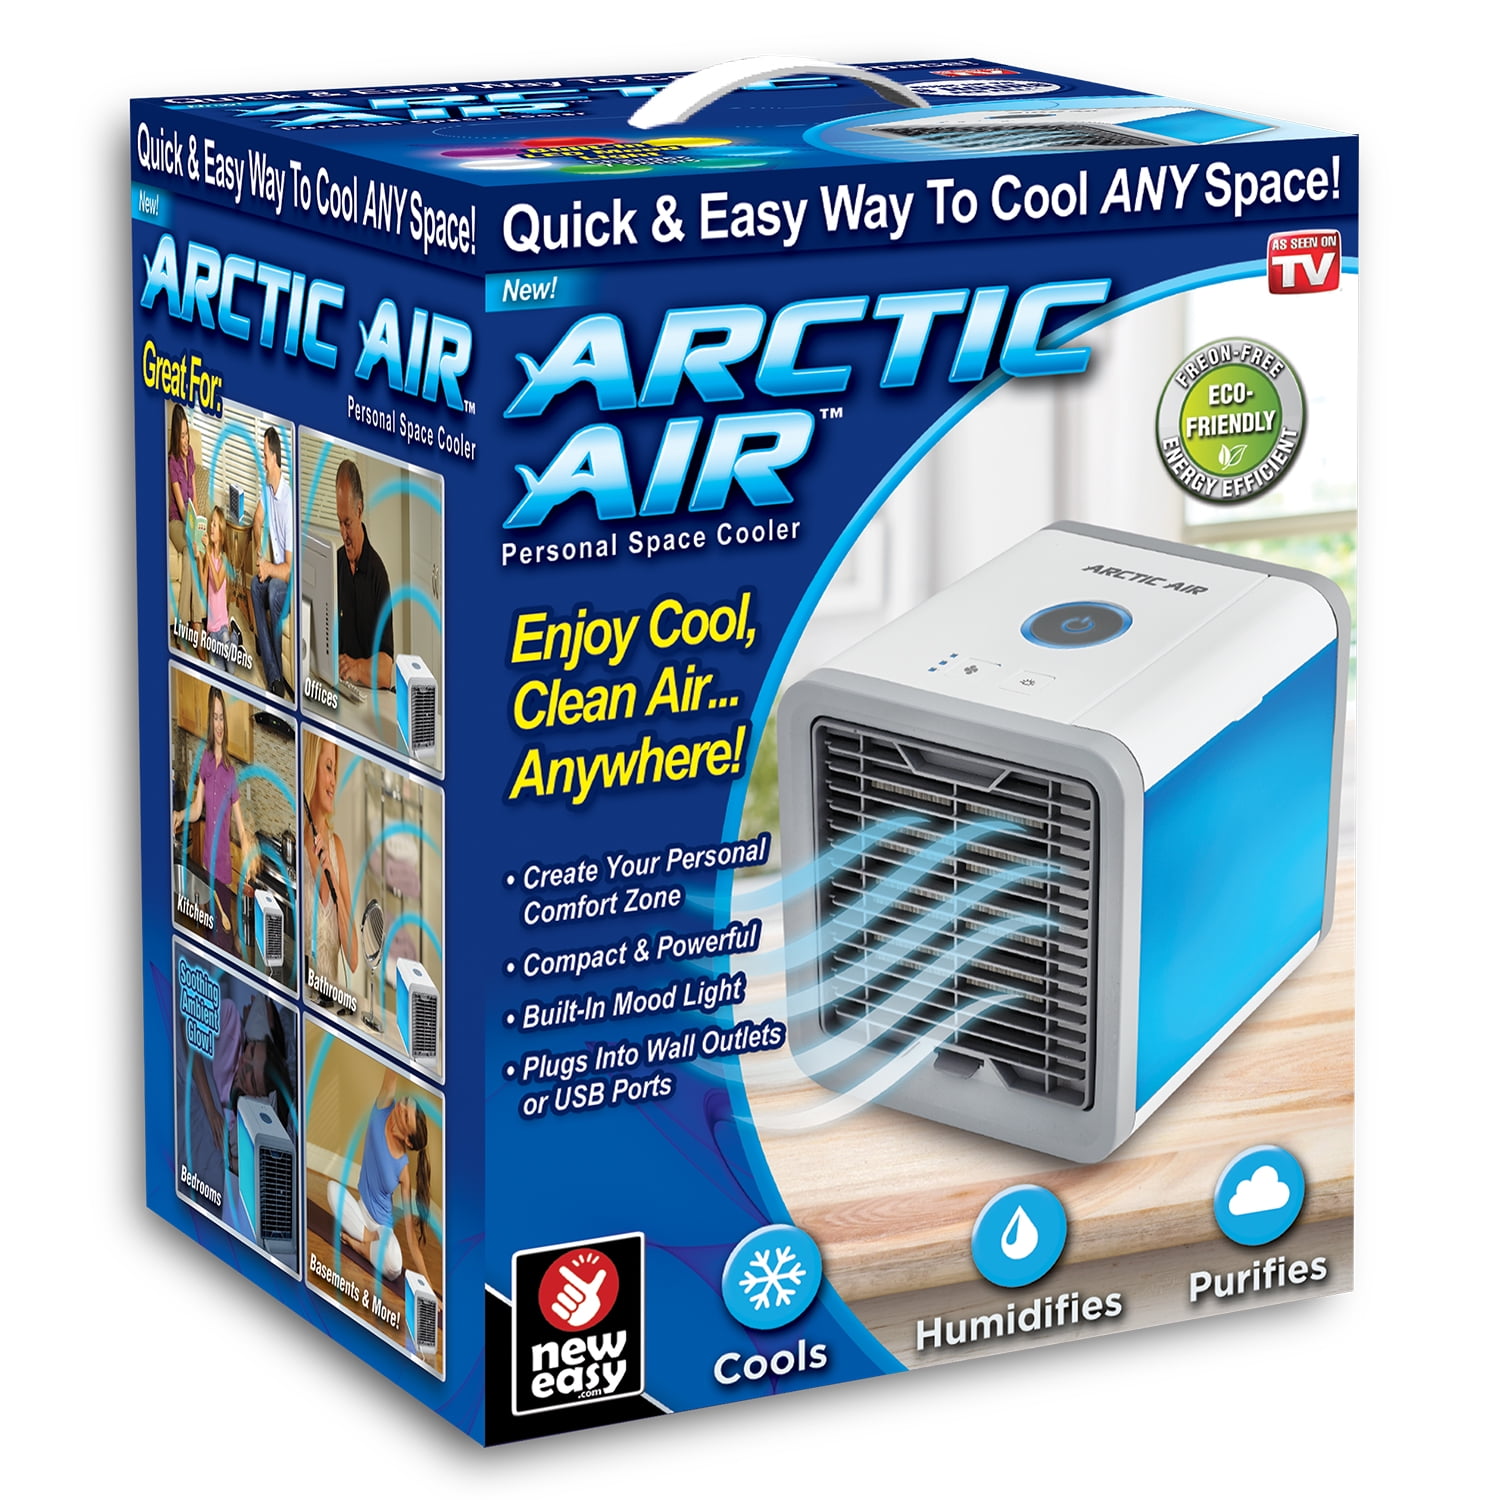 I'm thirsty Monumental calorie Arctic Air - Portable in Home Air Cooler by As Seen on TV - Walmart.com